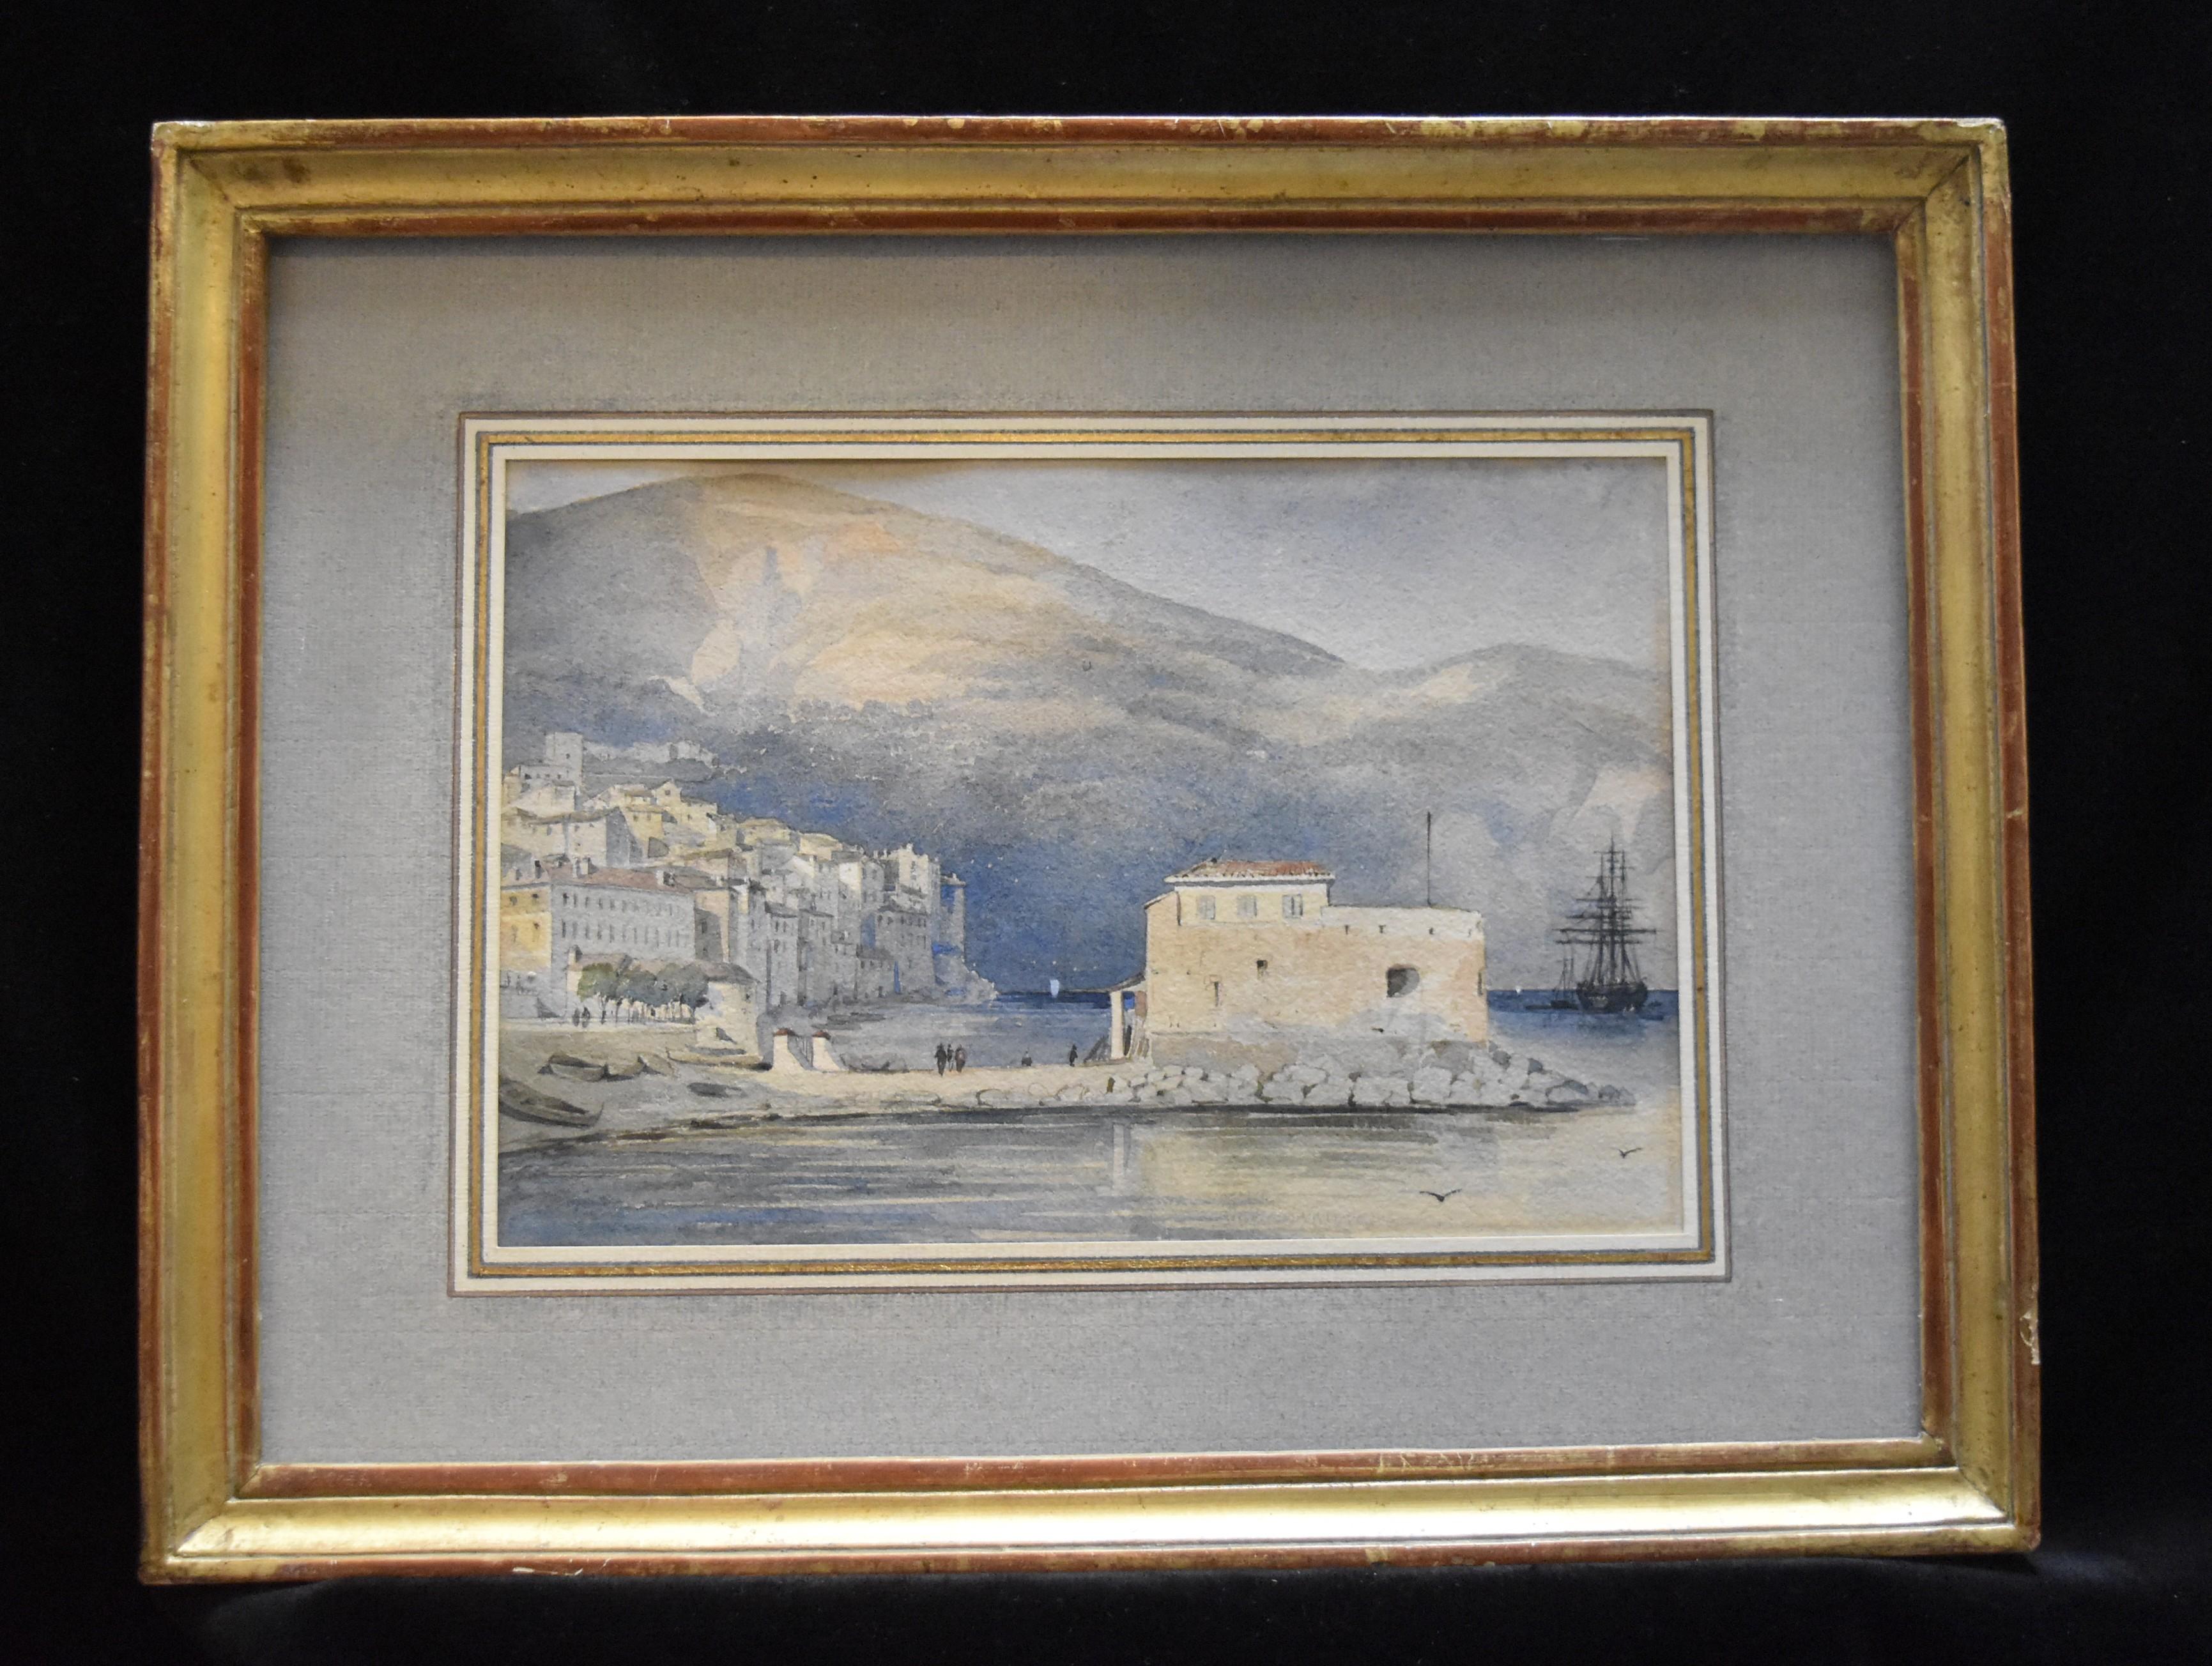 19th Century french school, Villefranche-sur Mer, the harbour, watercolor - Art by Unknown